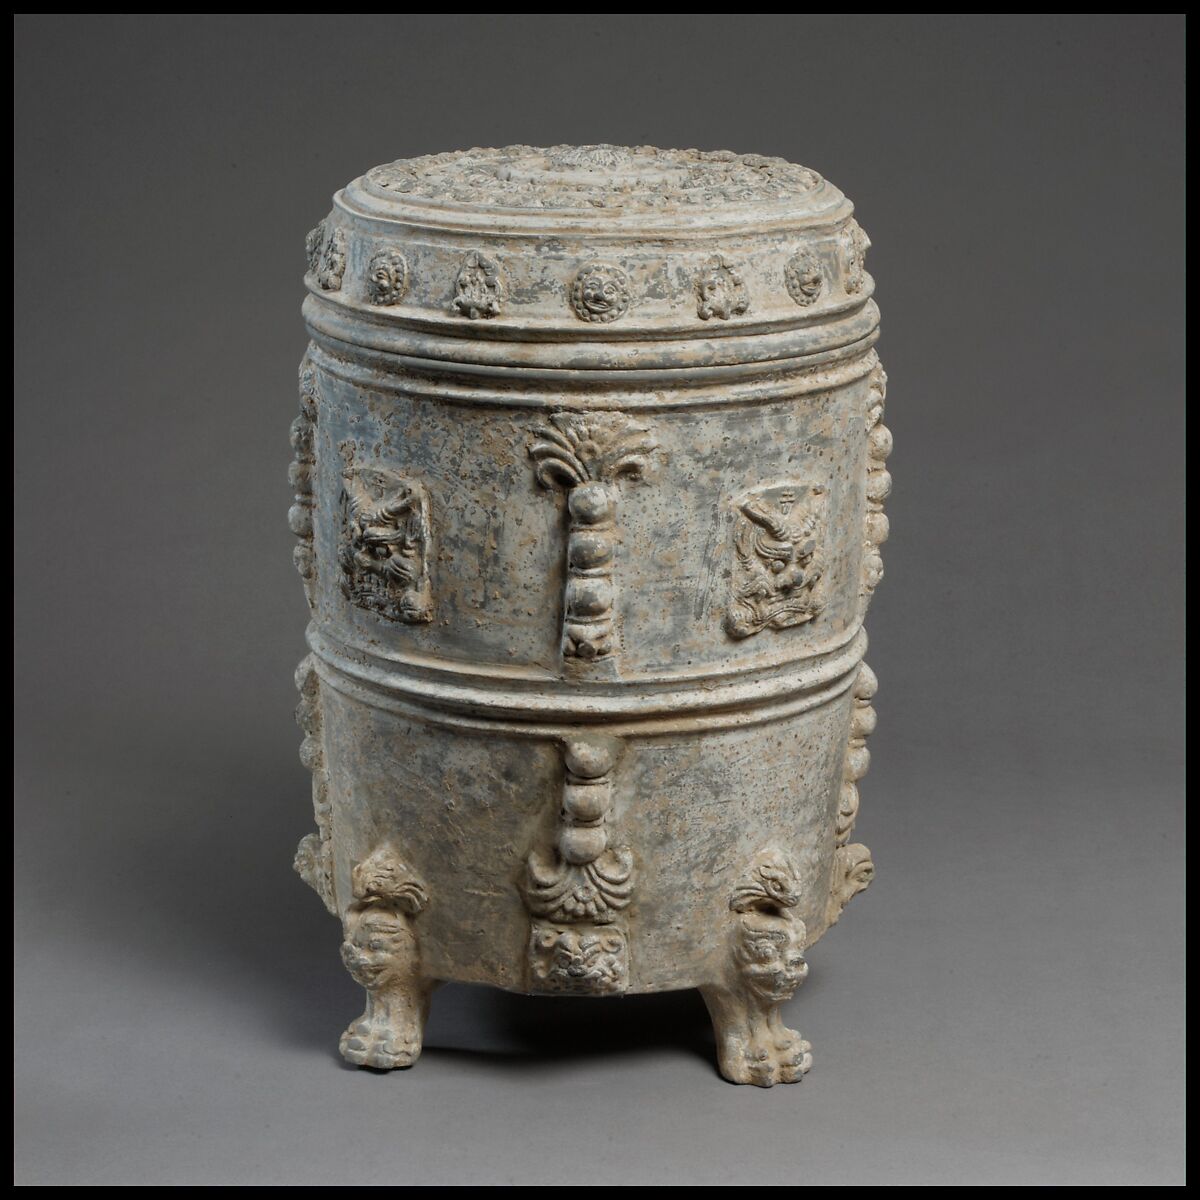 Covered footed vessel
, Earthenware with applied-relief decoration under white slip, China